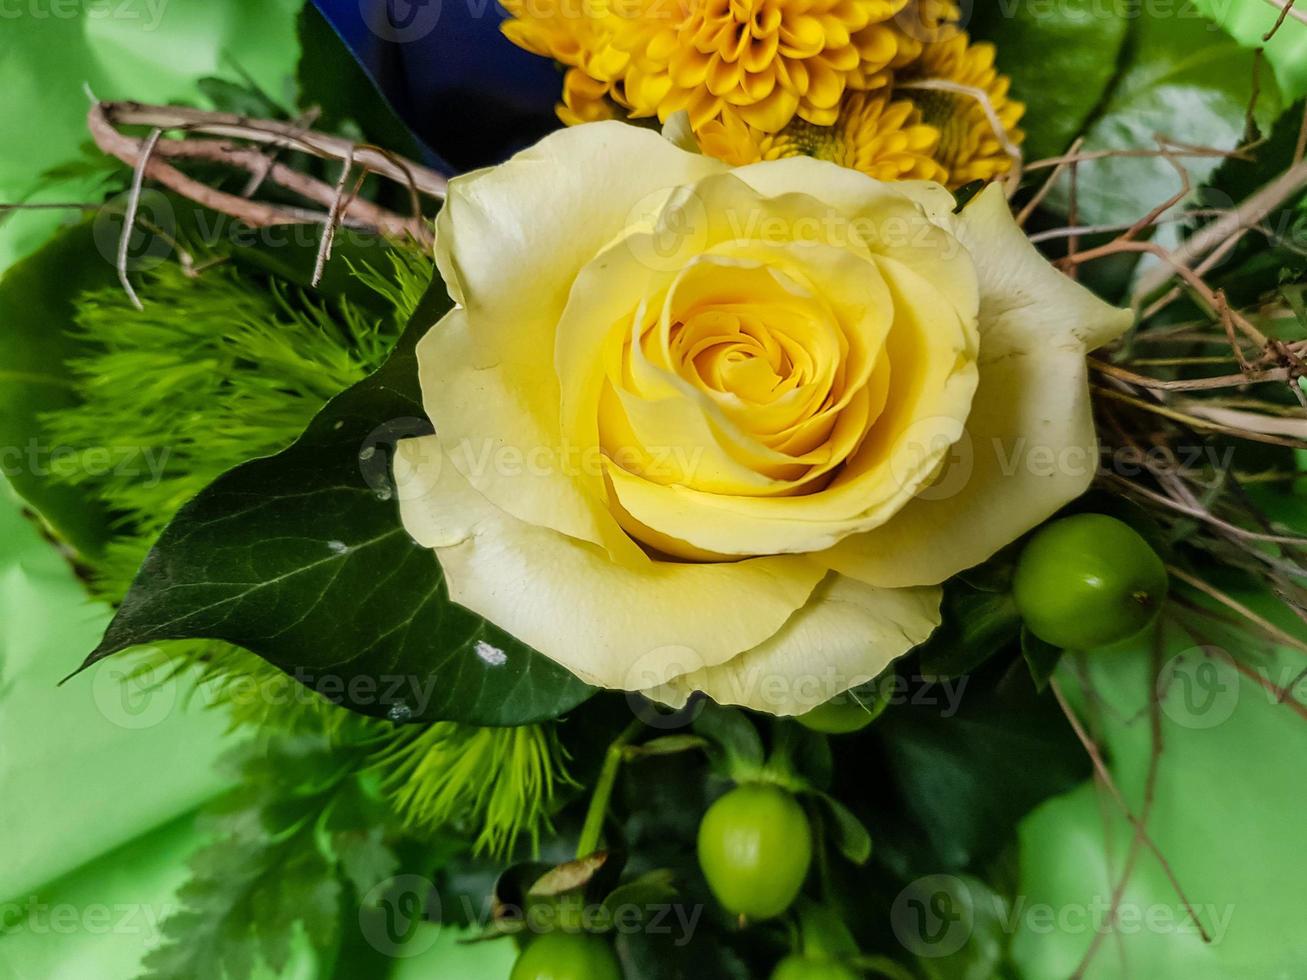 Bridal bouquet with different flowers photo